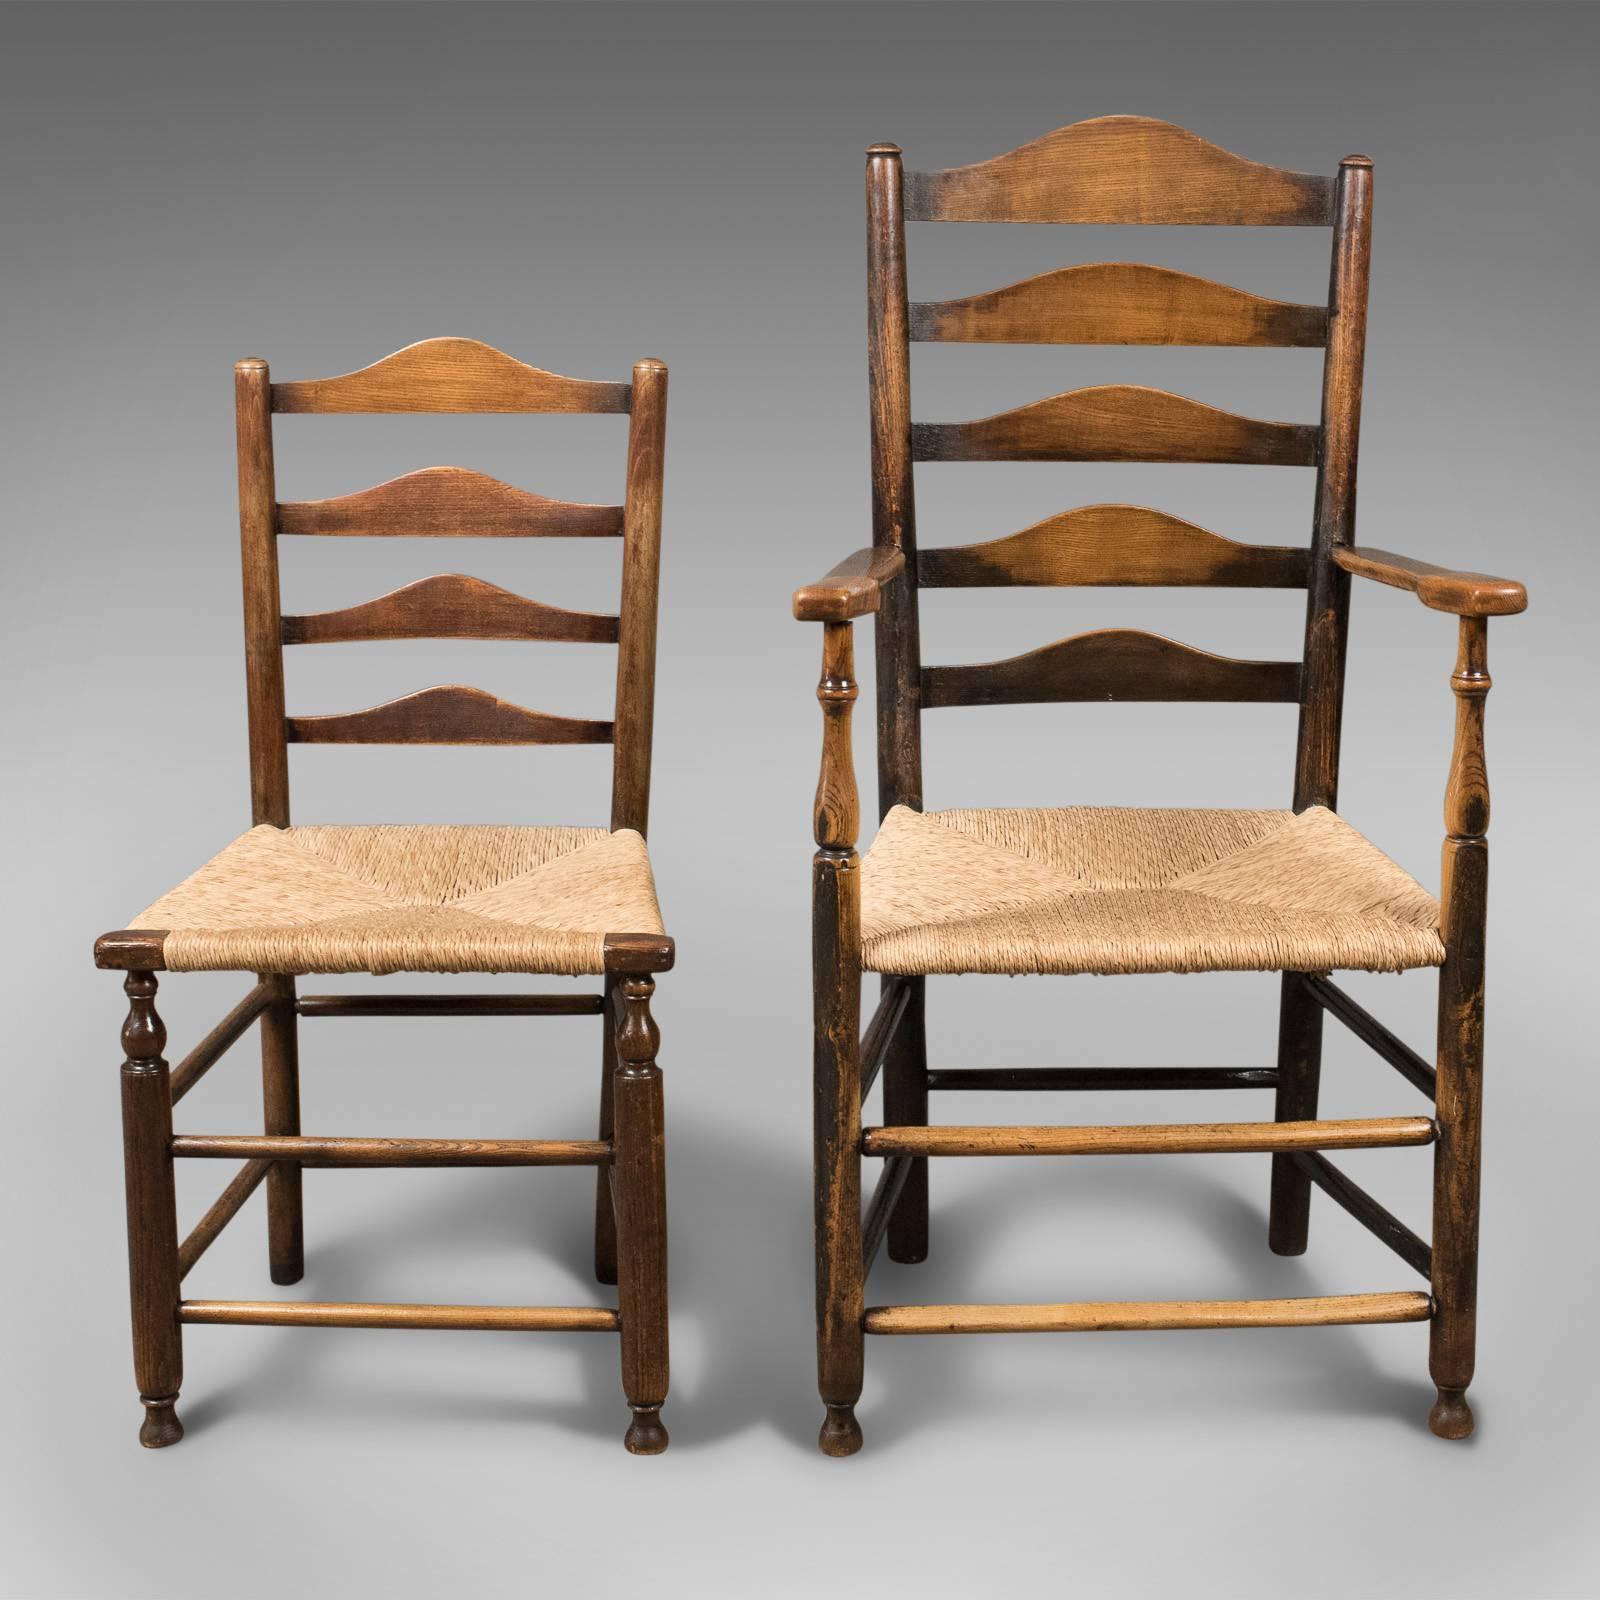 This is a set of eight antique dining chairs, English ladderbacks dating to the middle of the 19th century, Shaker, circa 1850. The set displaying minor variation.

Beautifully made in solid, English oak
Displaying excellent colour, grain